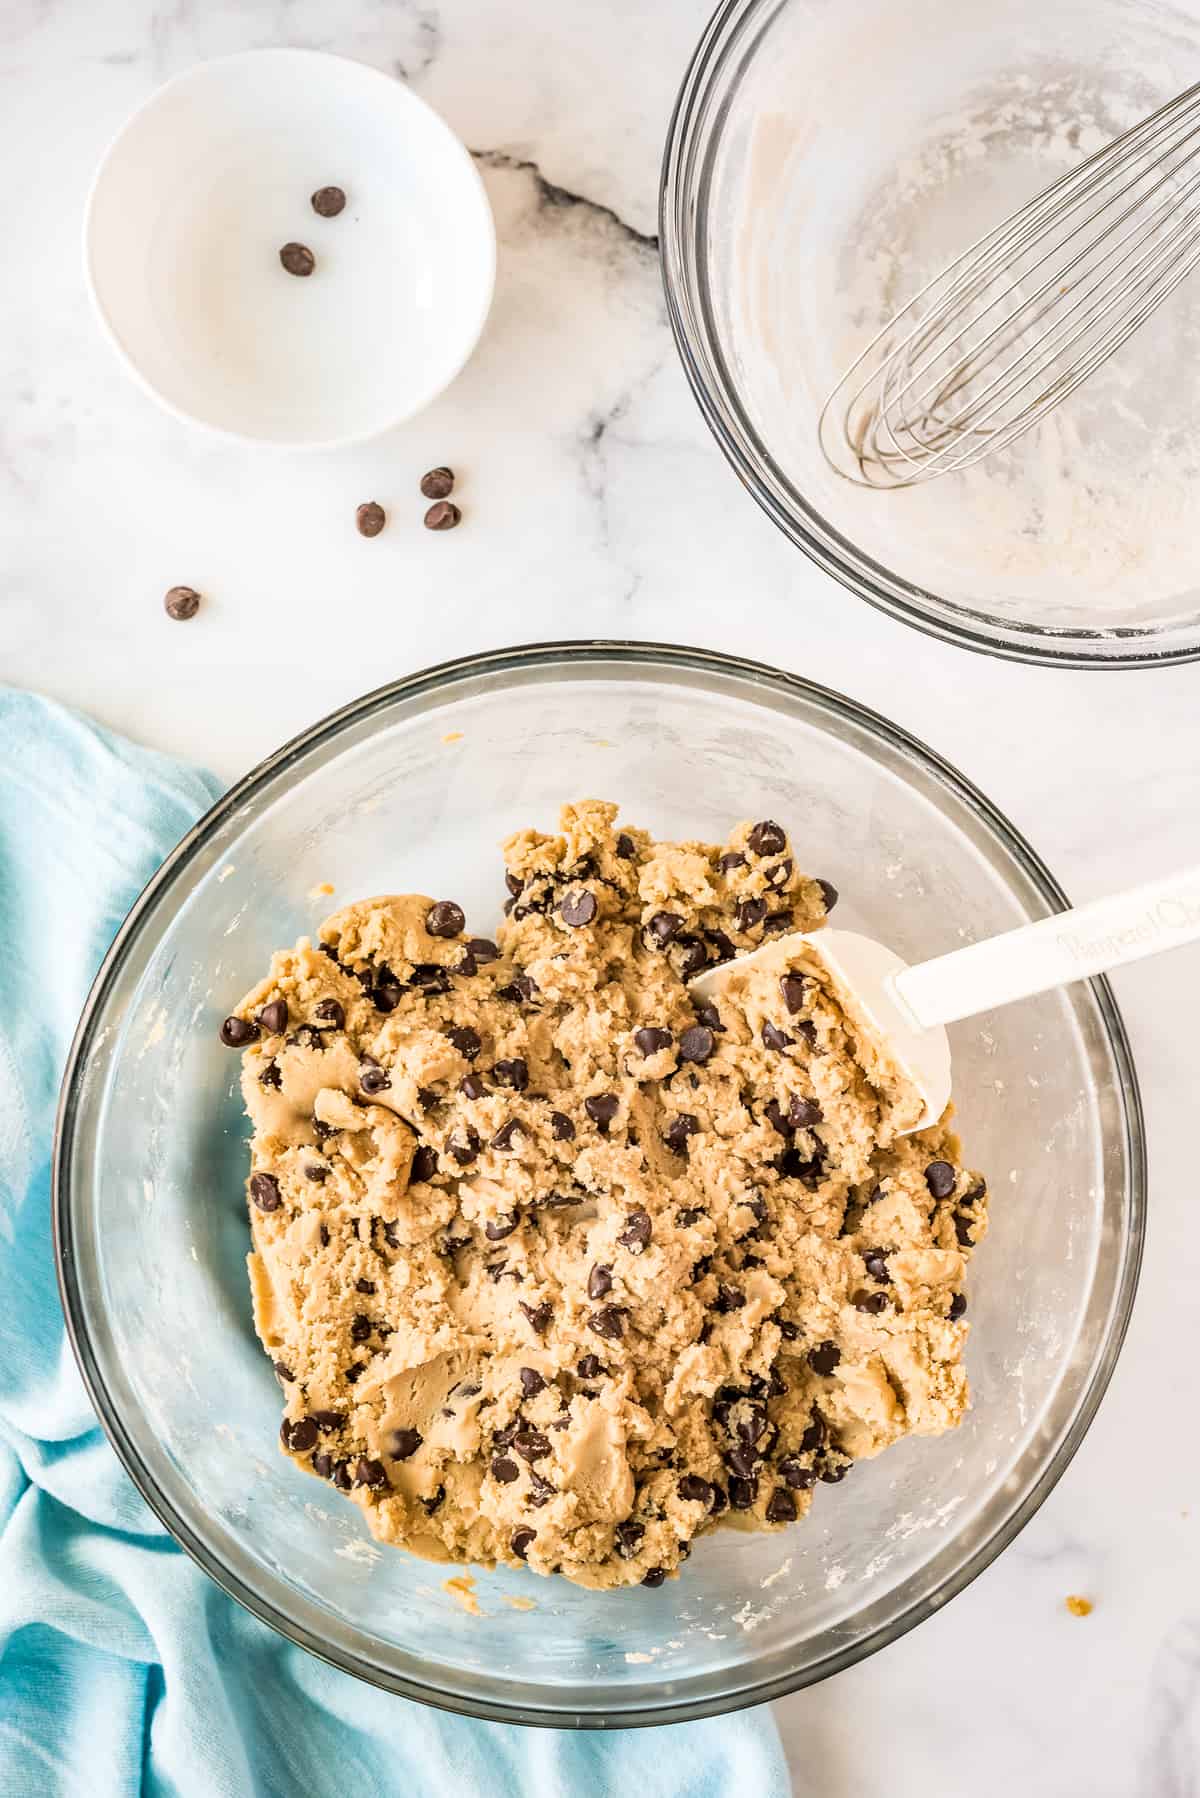 Chocolate chip cookie dough in bowl